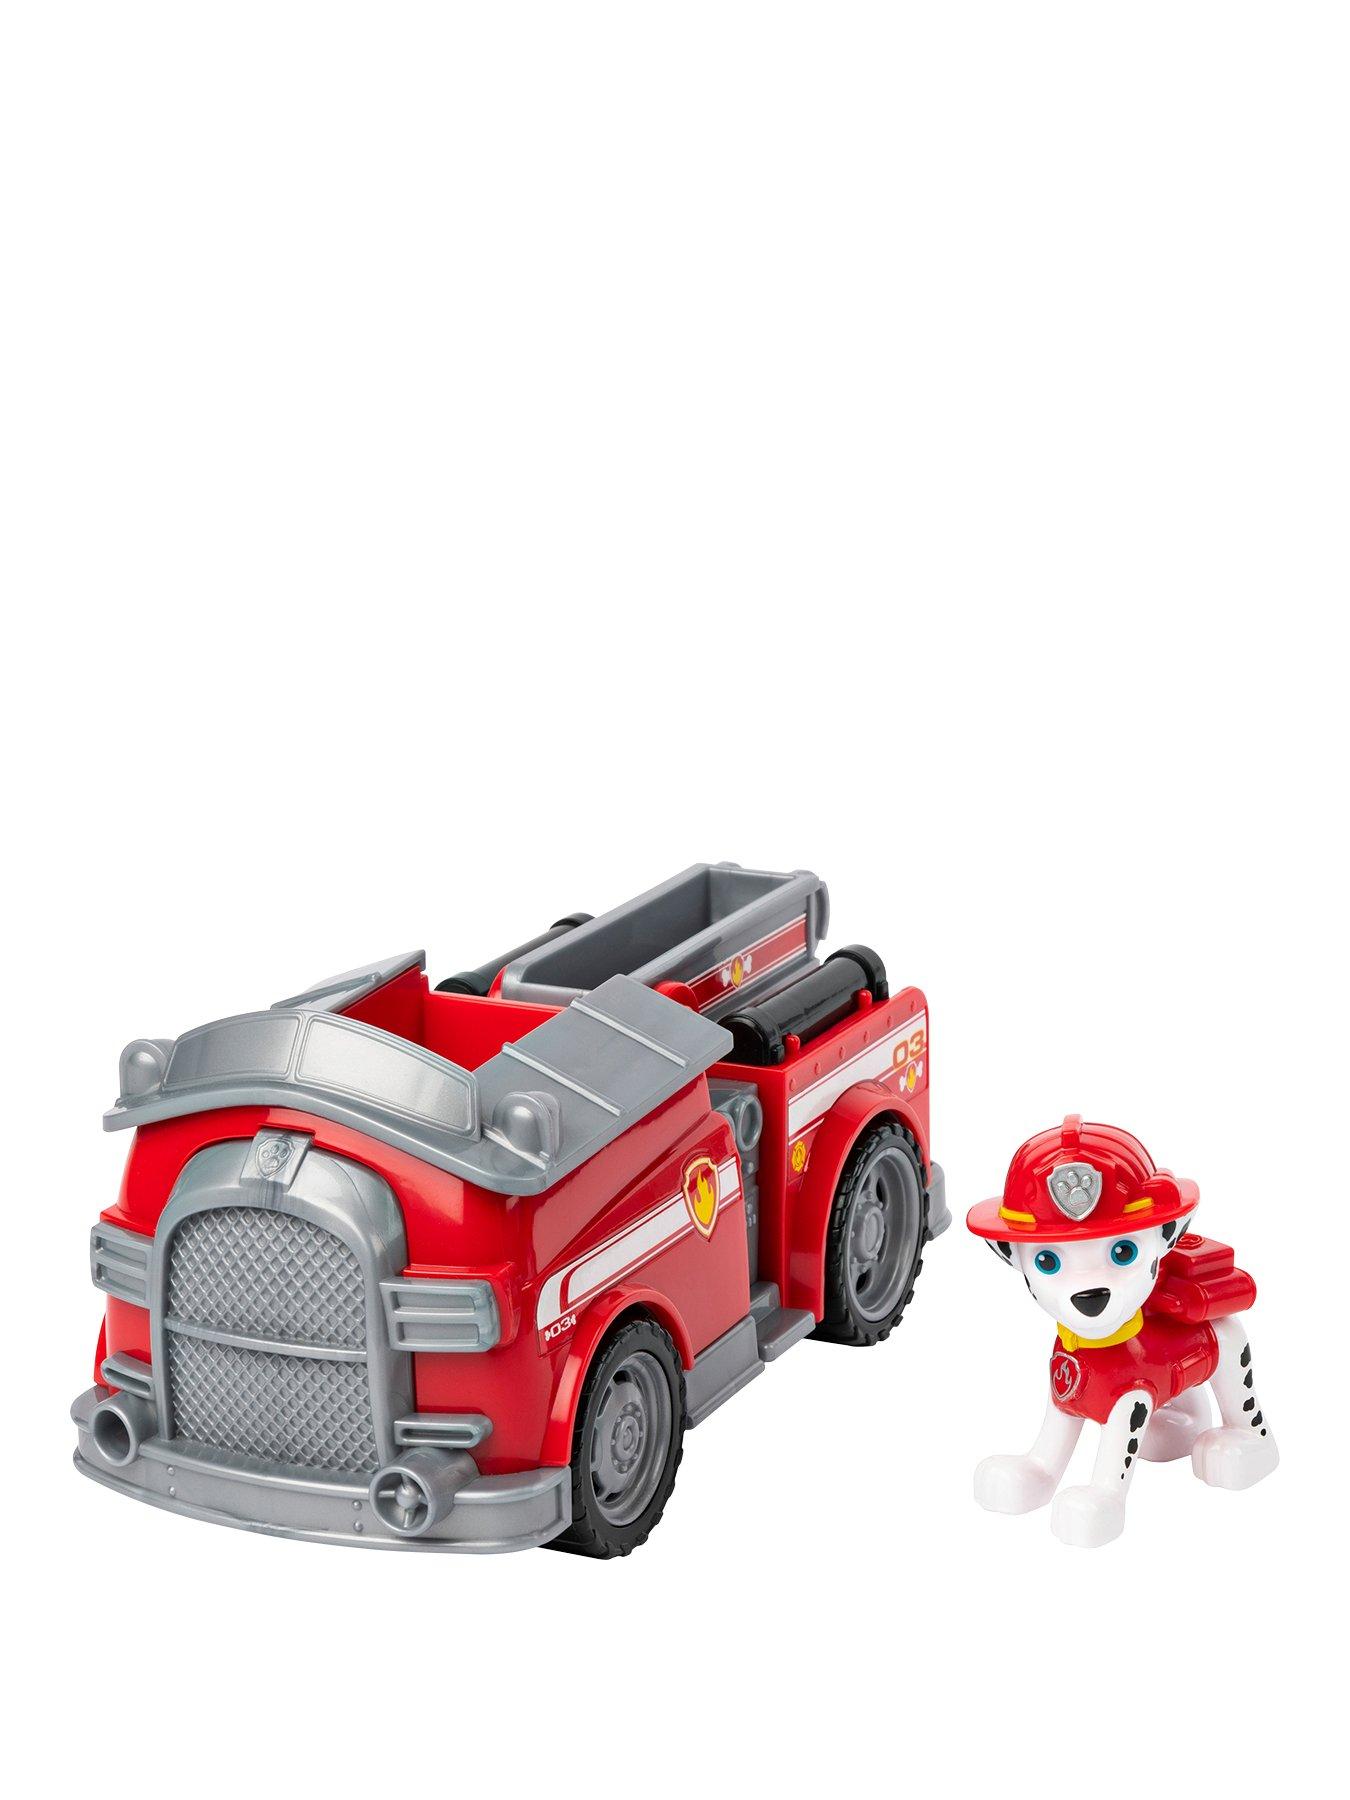 Waterford fire department rigs roblox